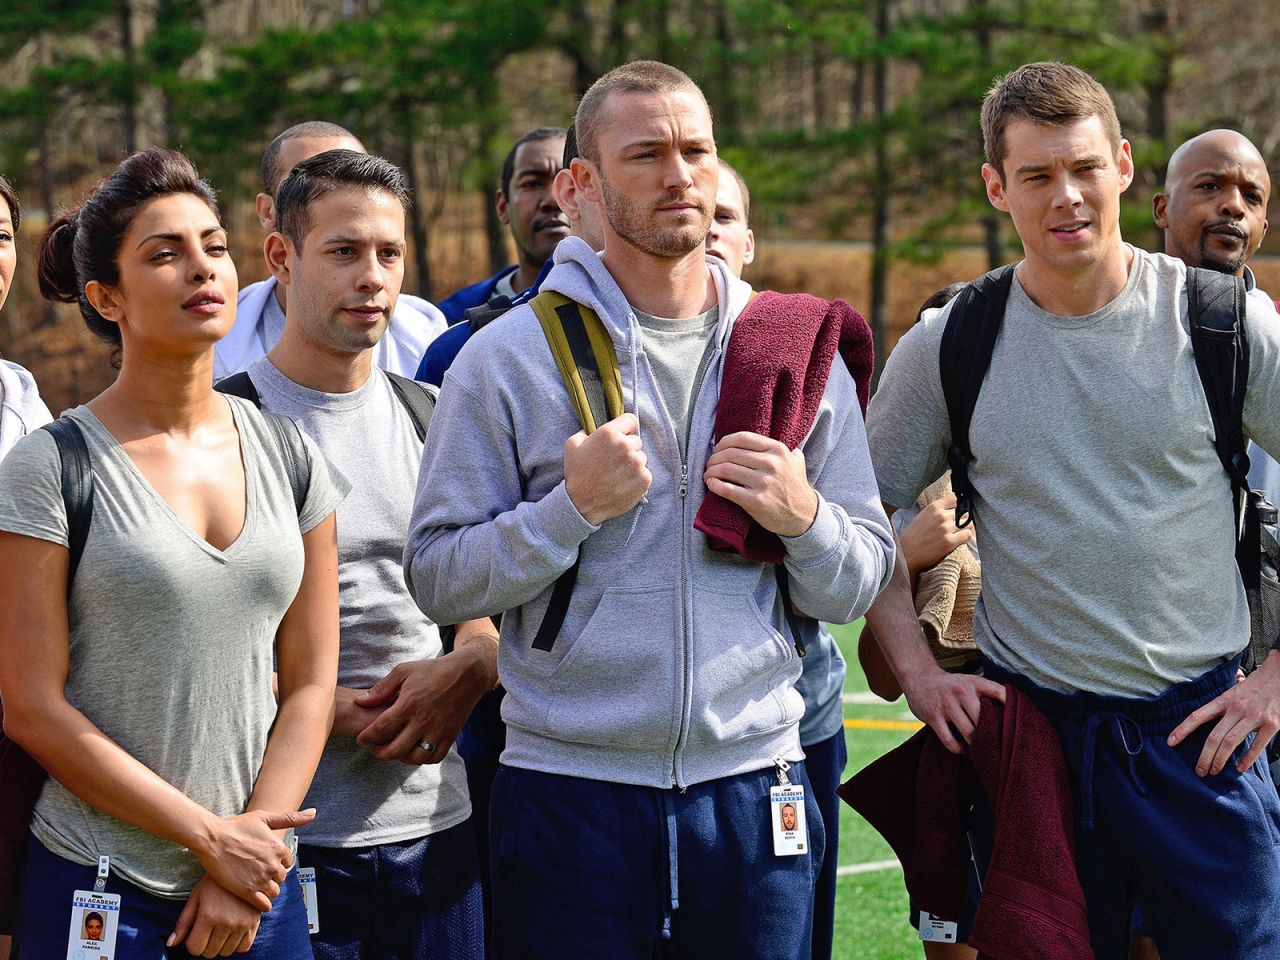 Quantico Characters for 1280 x 960 resolution